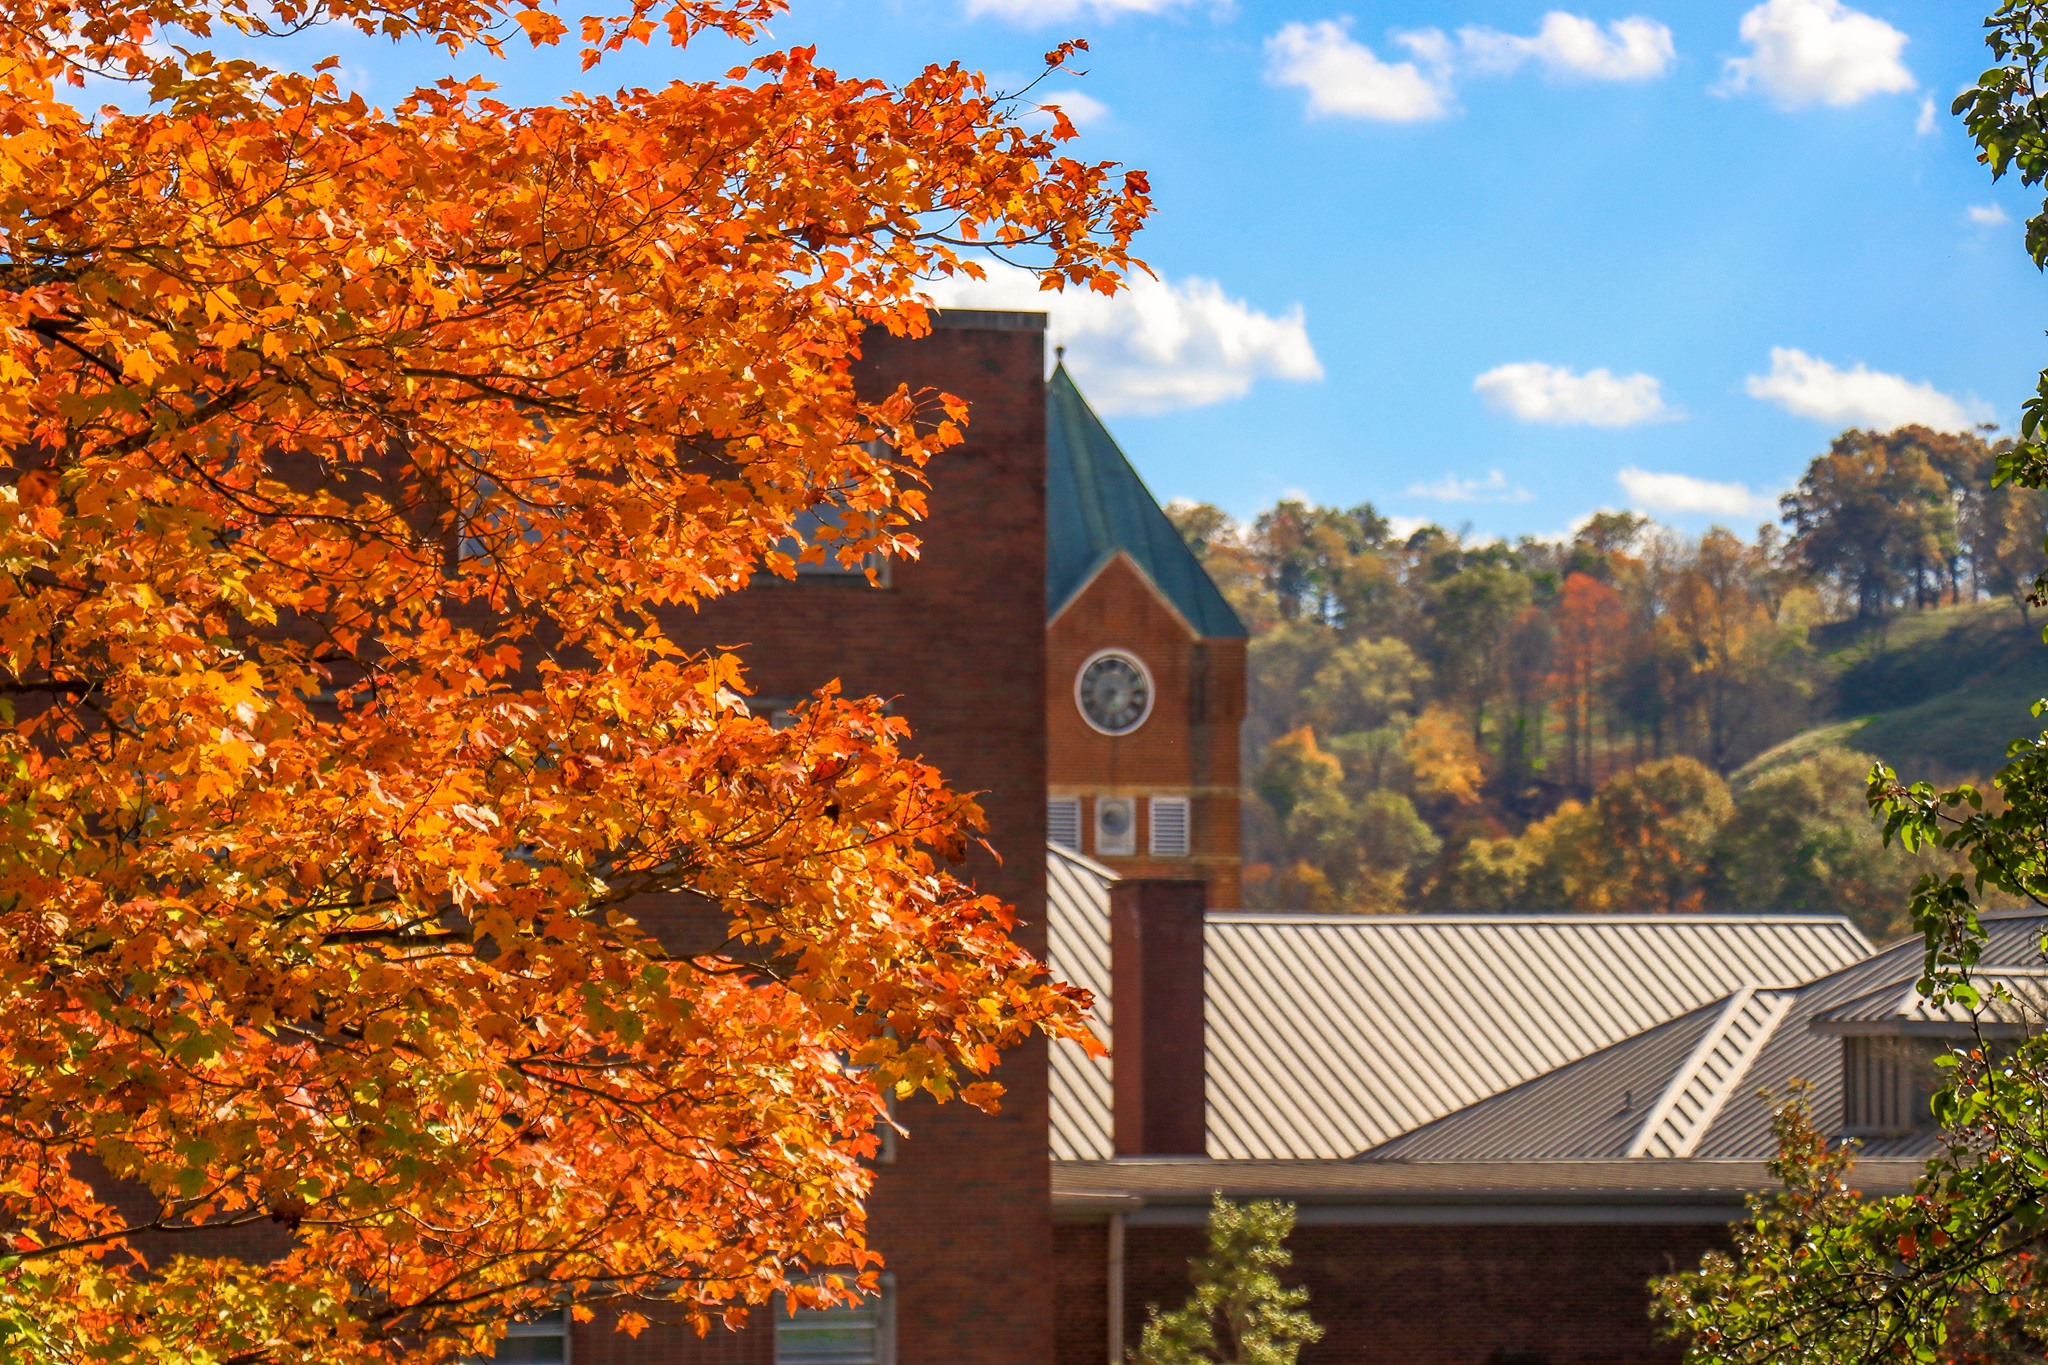 Blazing orange leaves stand in the foreground with the campus's clock tower and the surrounding autumn hills visible in the distance.